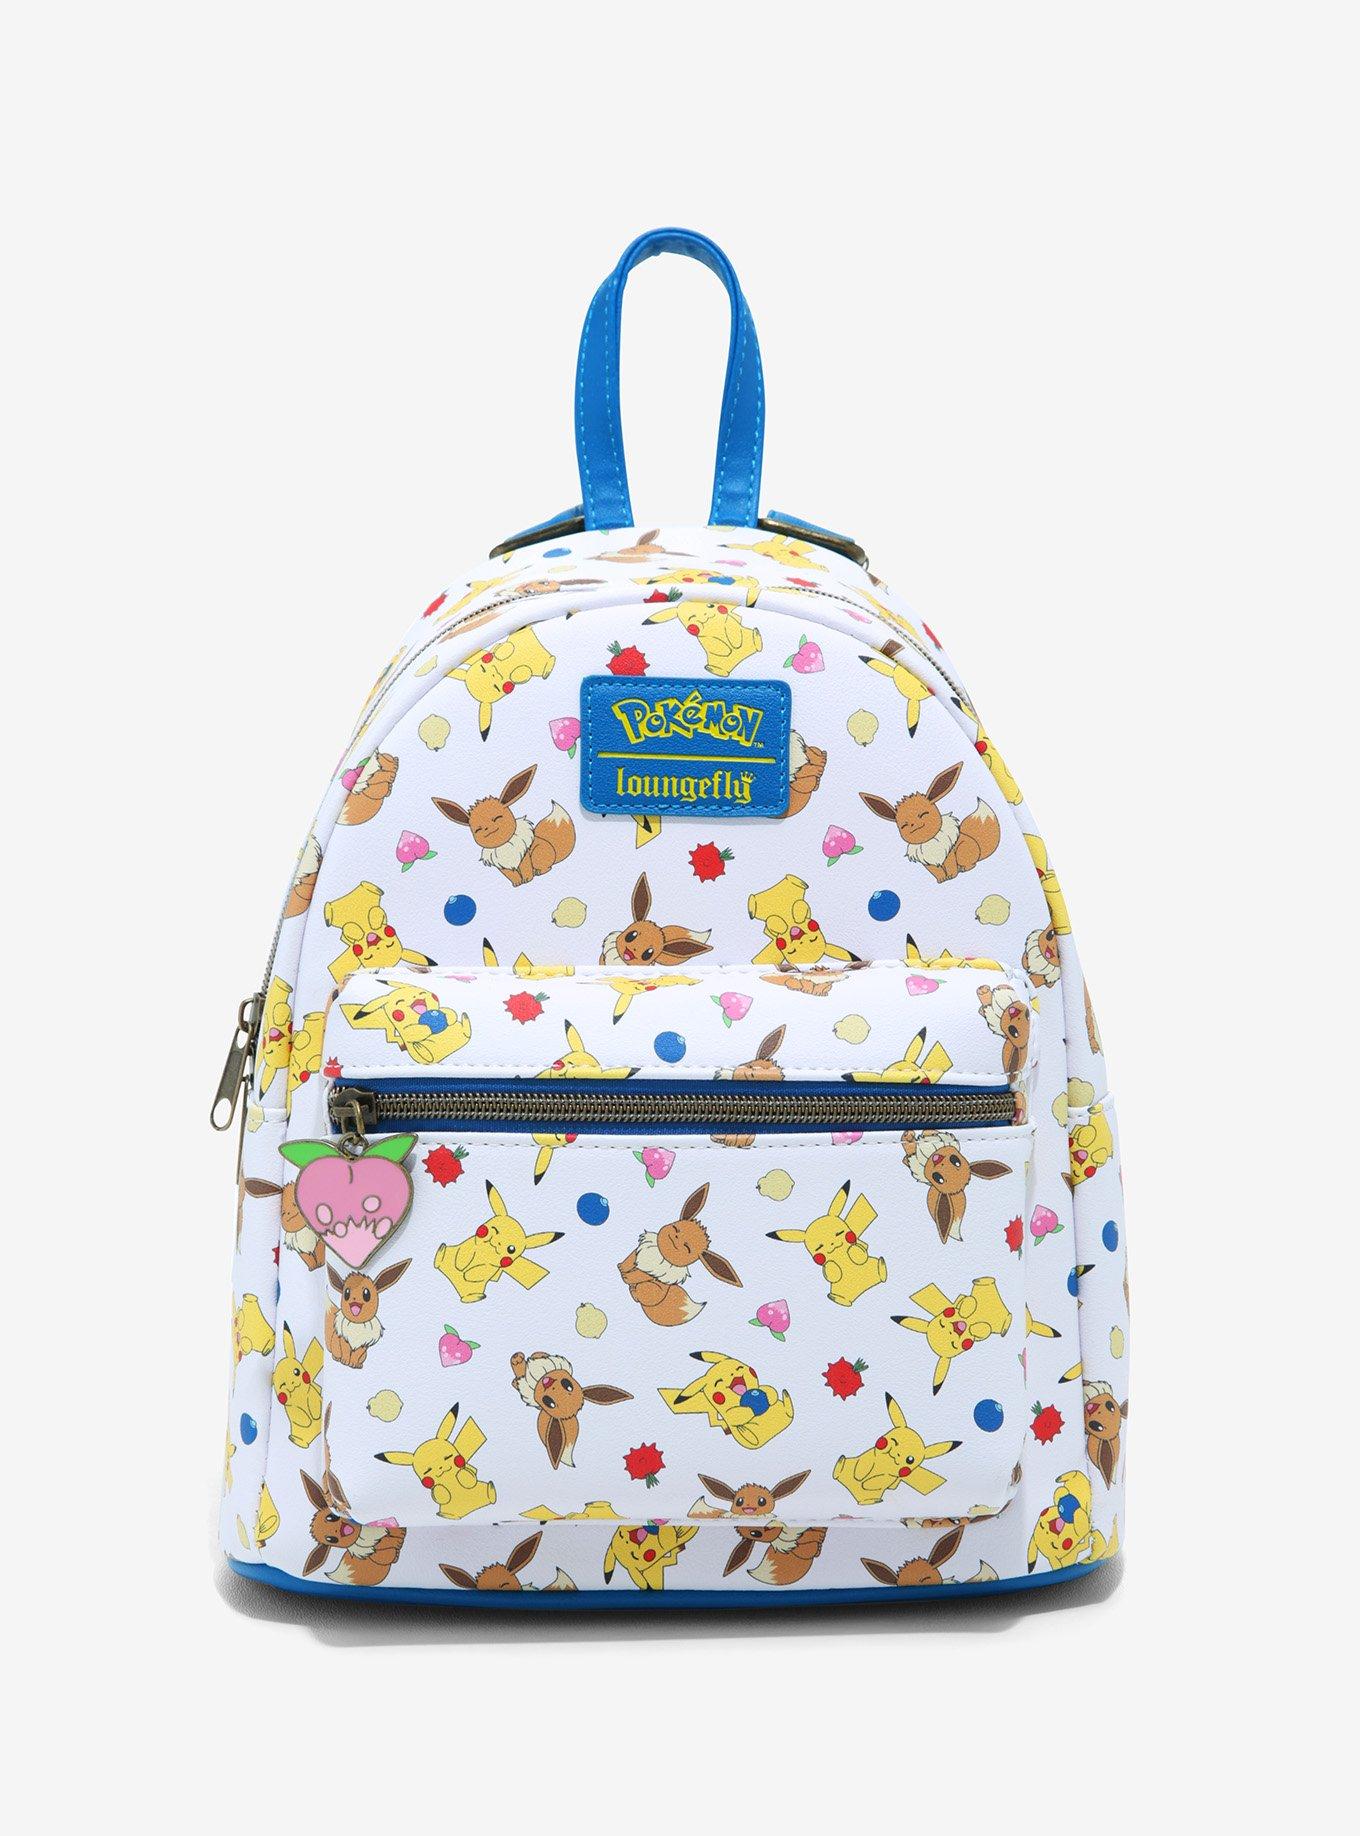 Buy Sleeping Pikachu and Friends Mini Backpack at Loungefly.